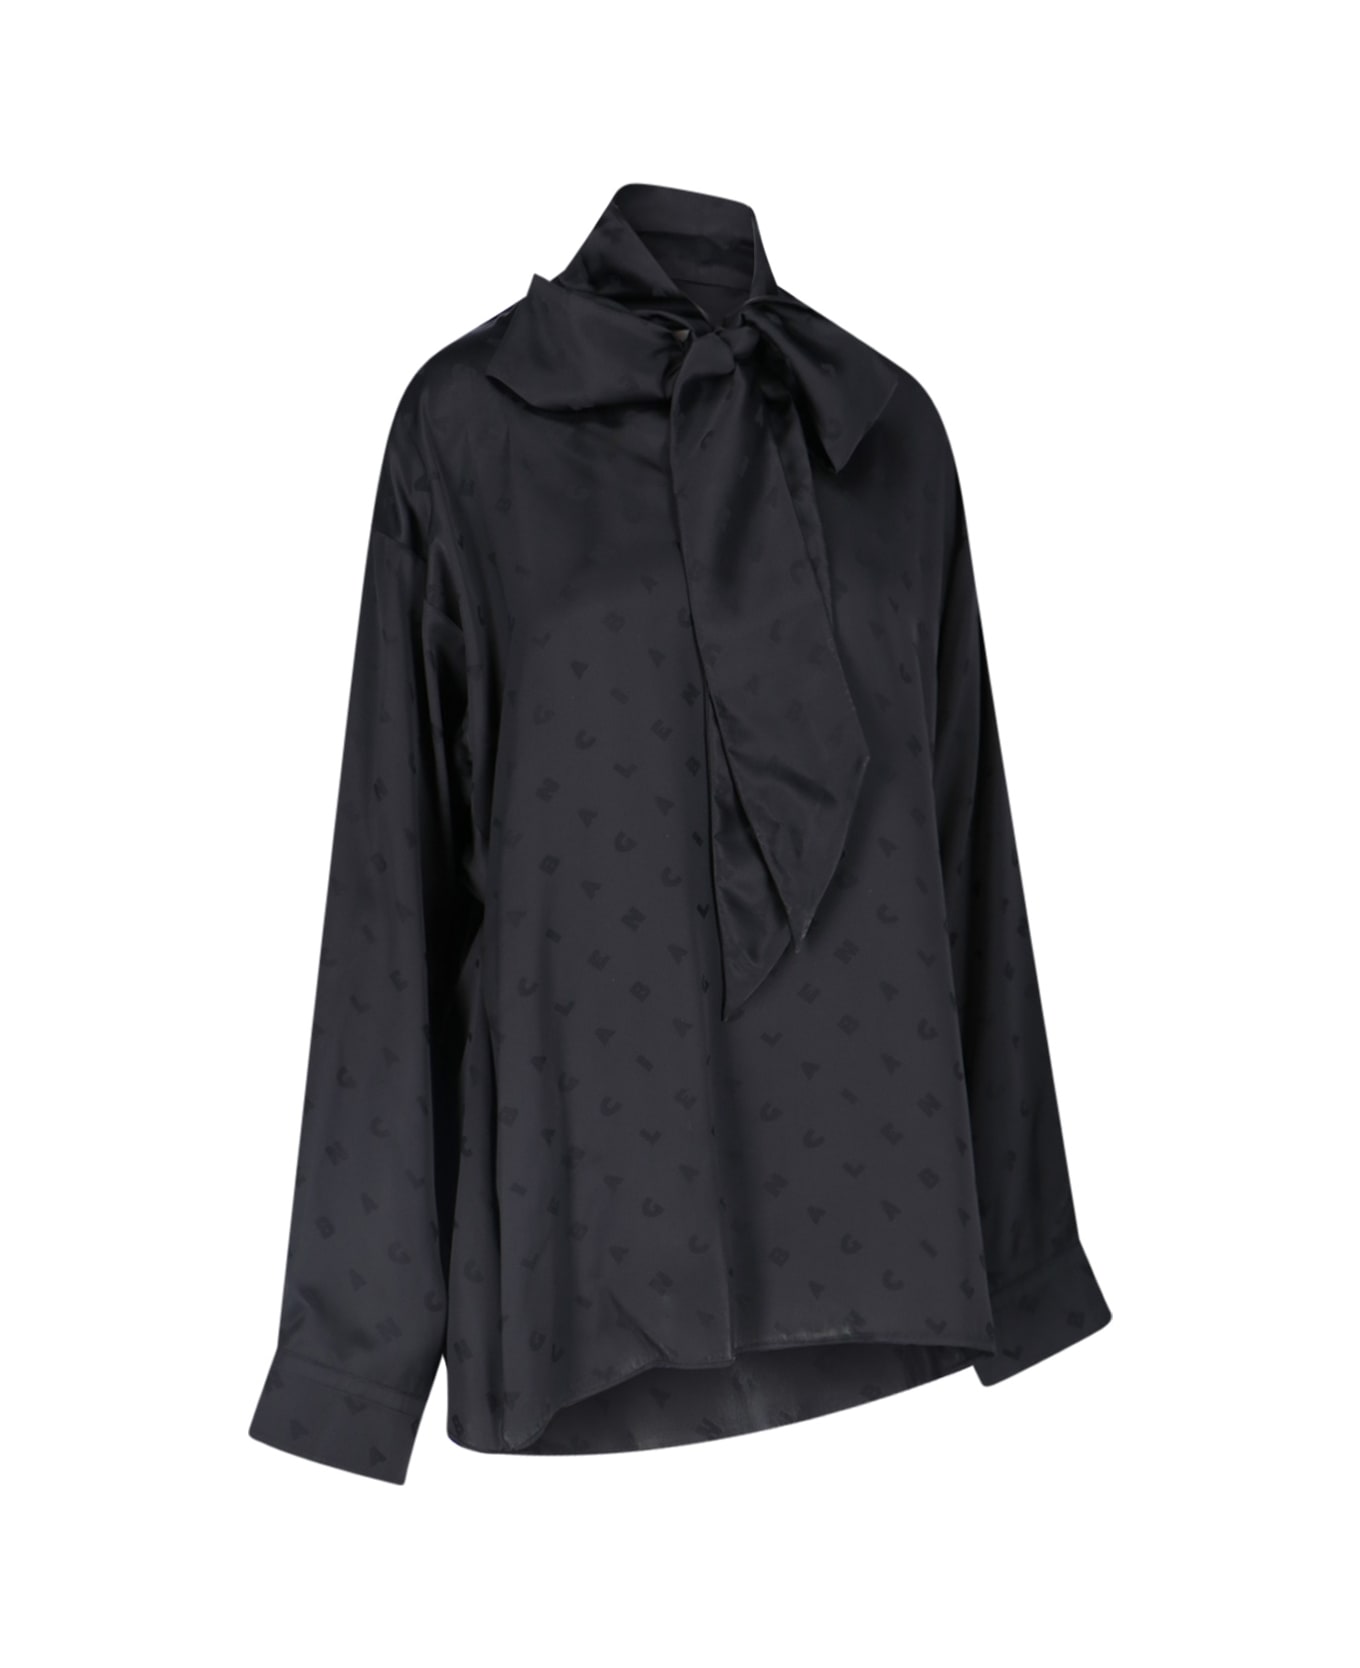 Balenciaga Oversize Hourglass Blouse With Long Panels On Collar - Black